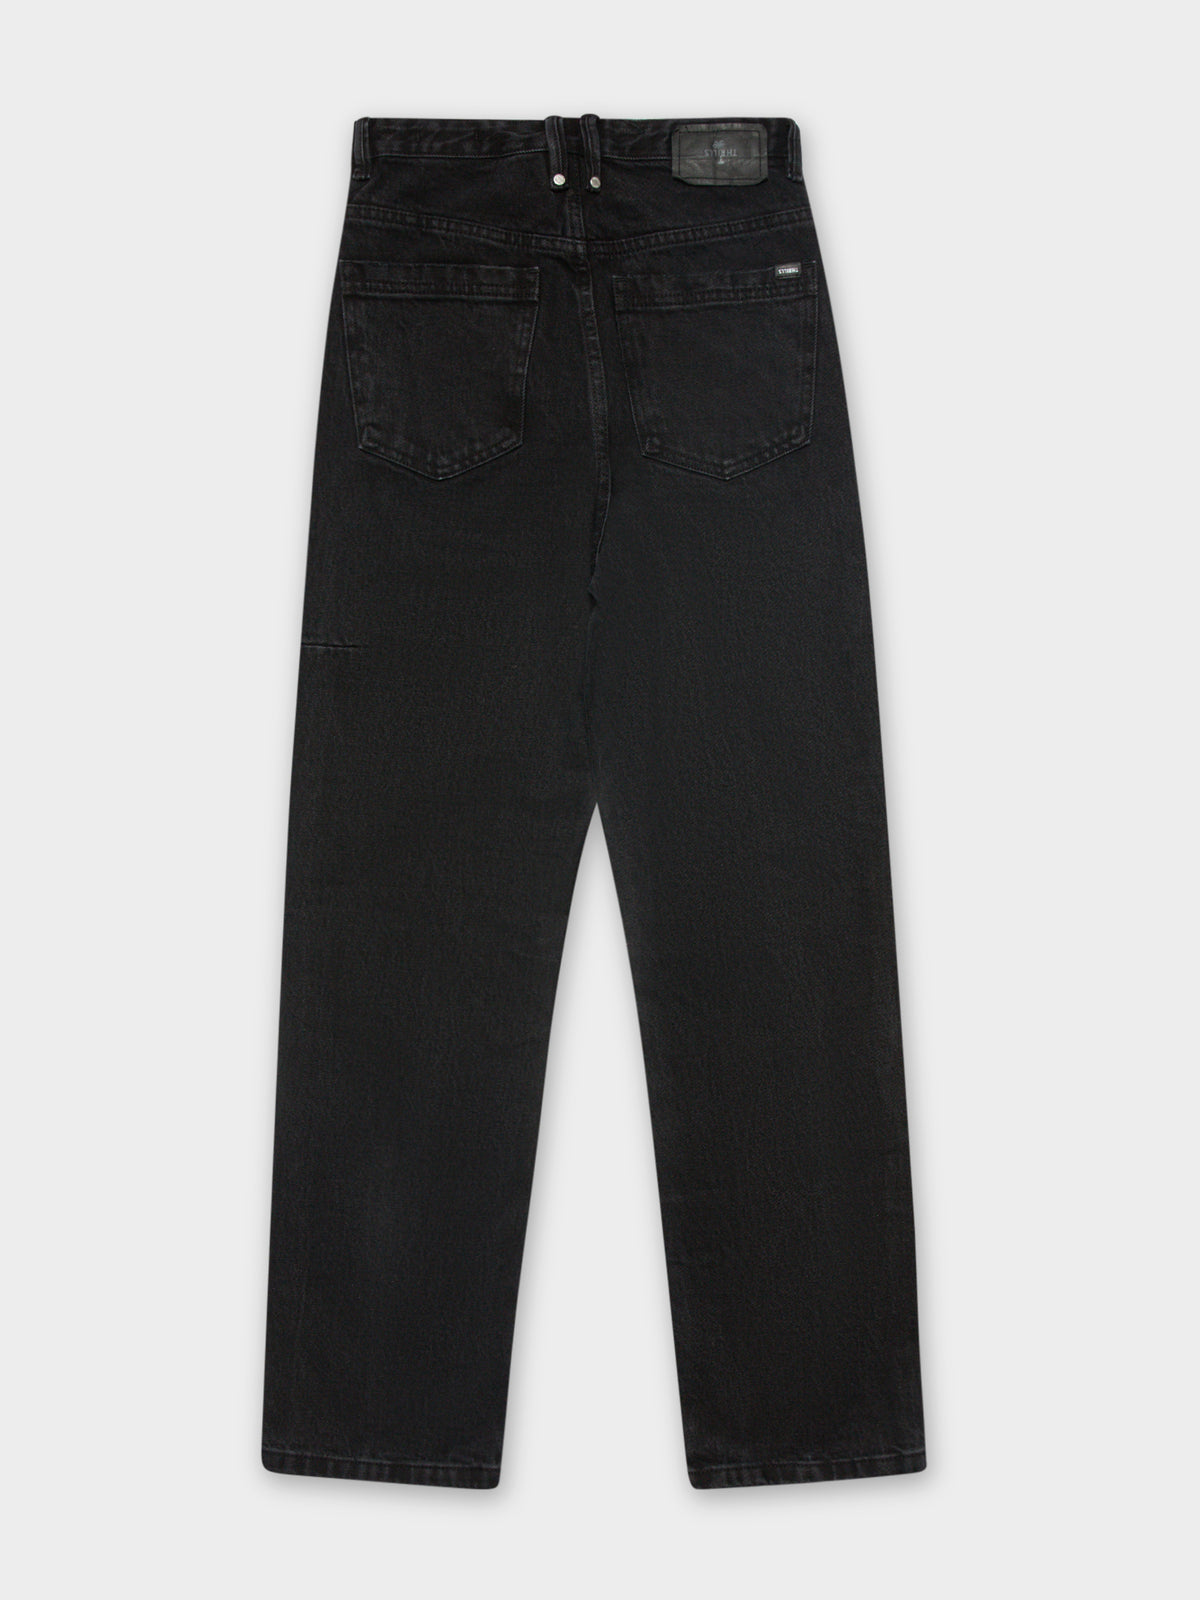 Pulp Jeans in Aged Black